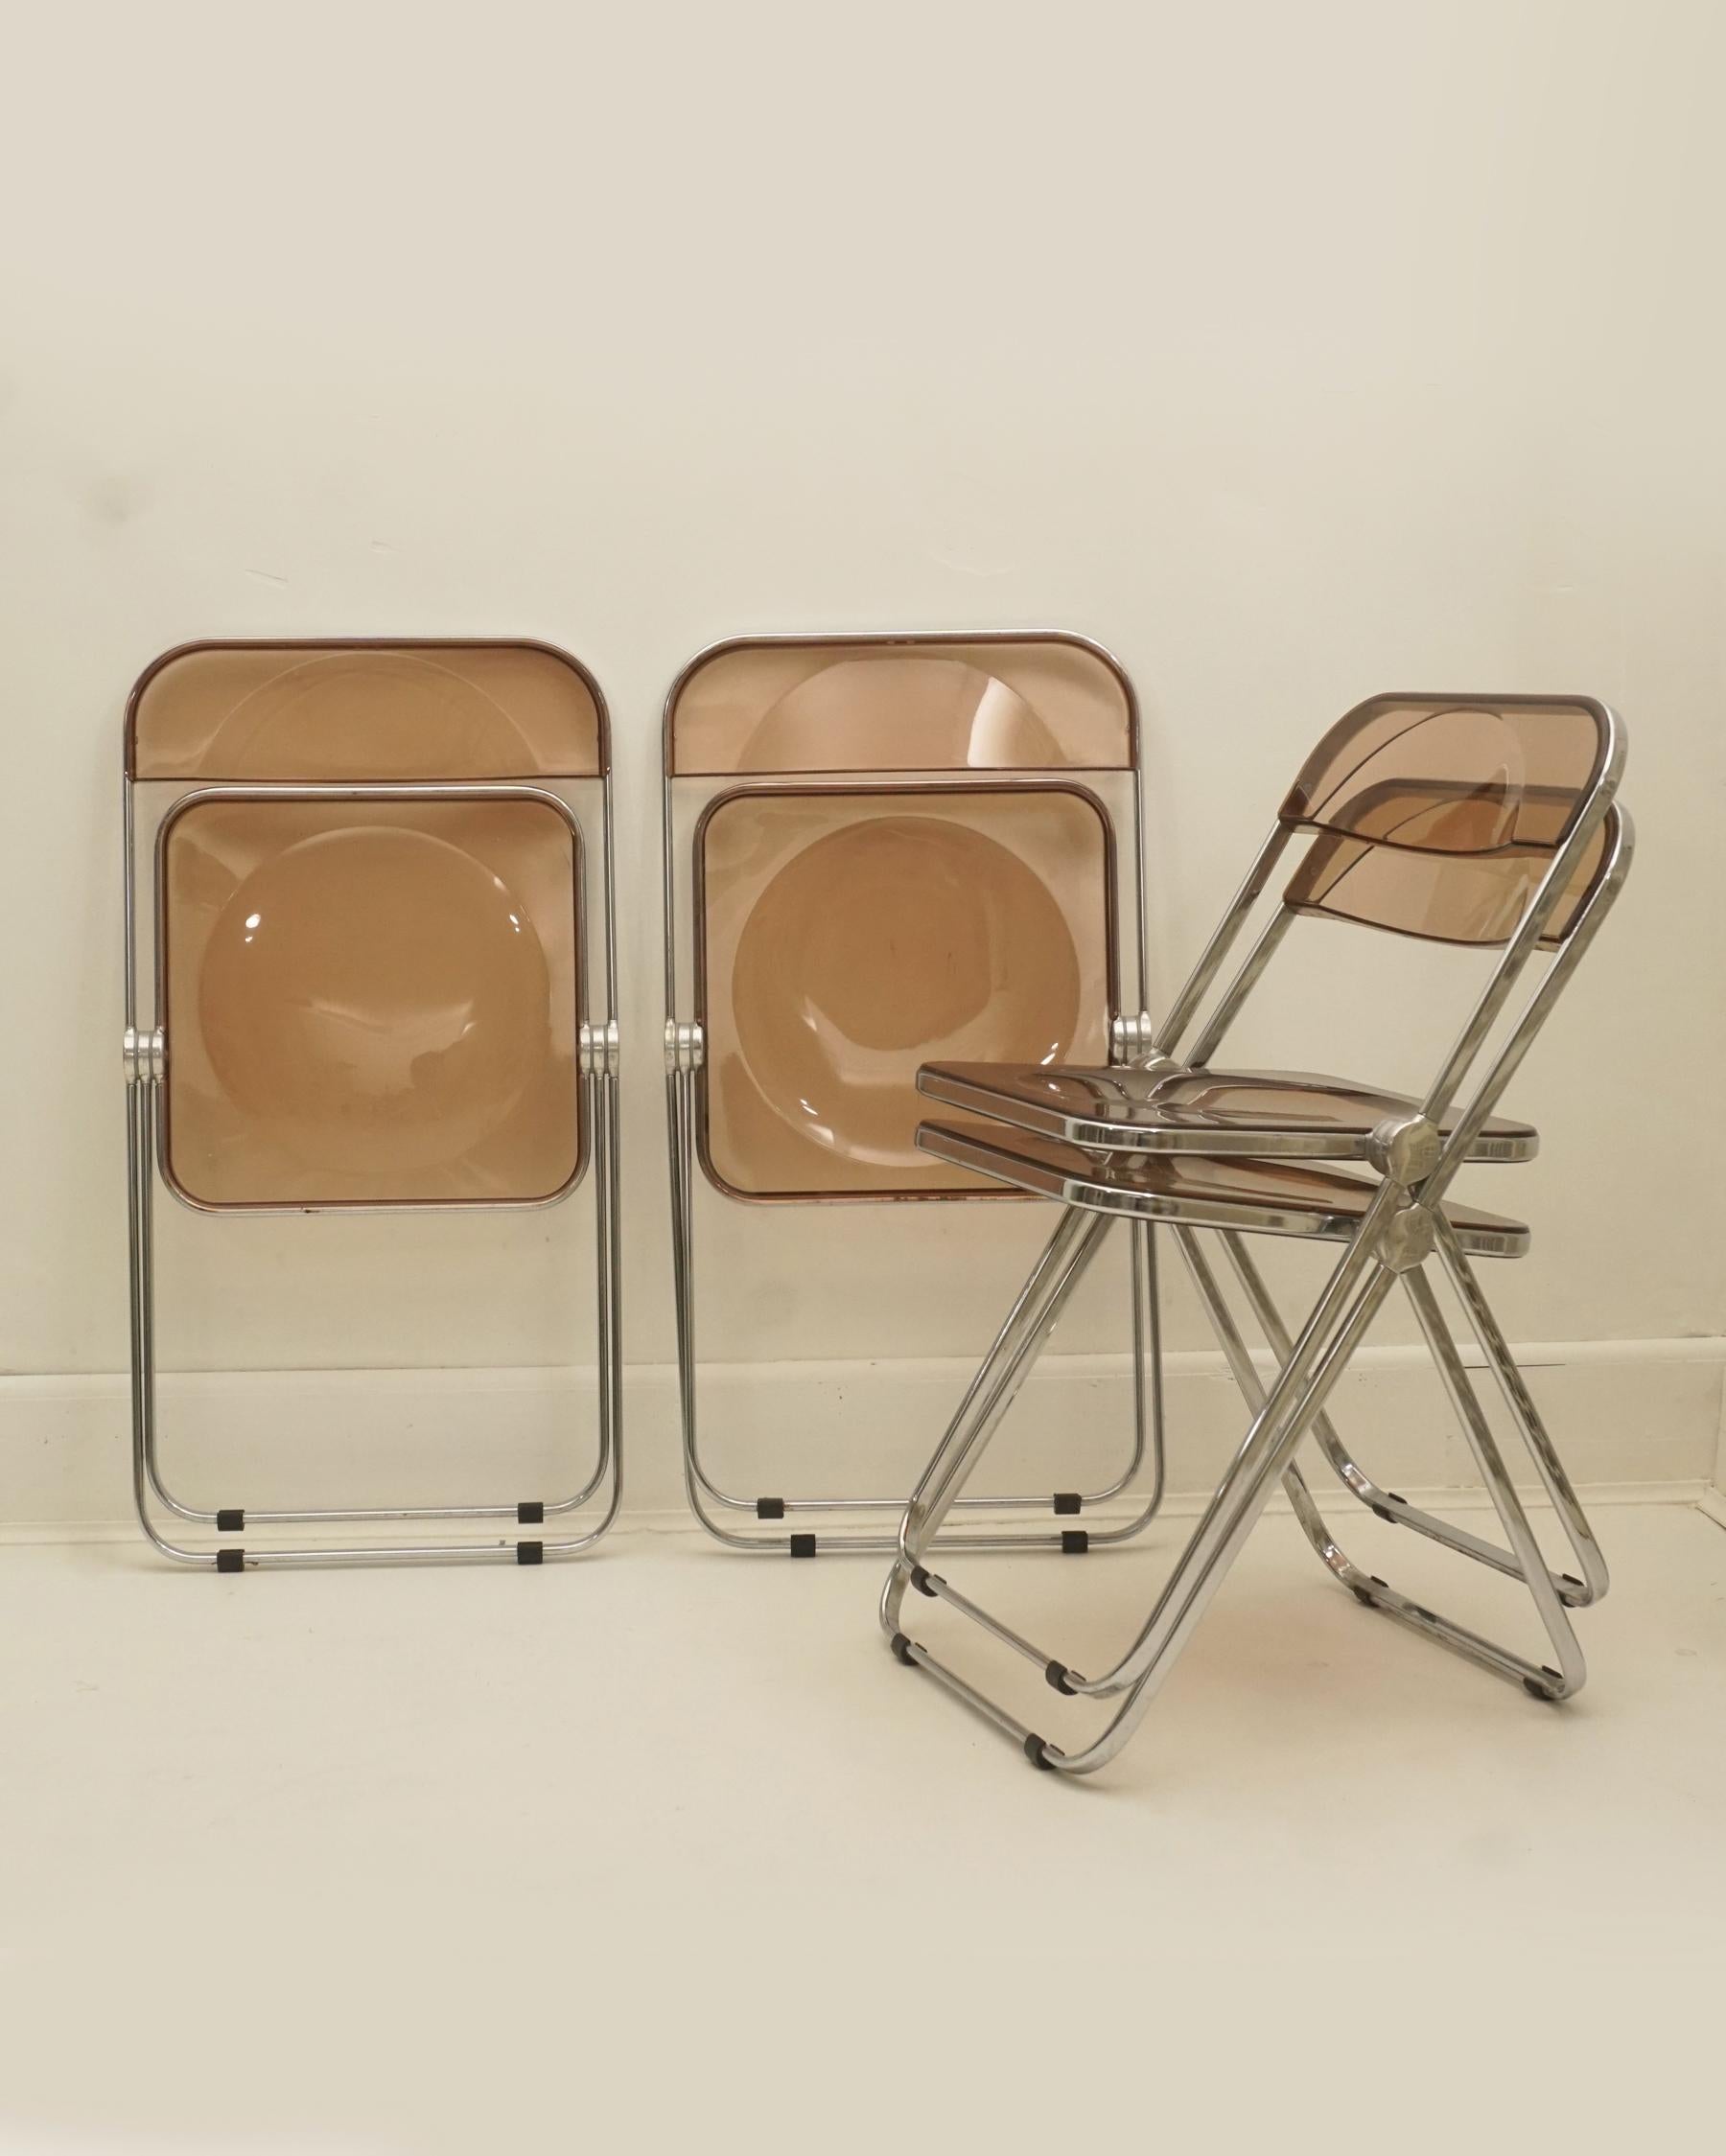 1960s folding chrome and smoke bronze lucite chairs by Giancarlo Piretti for Castelli. Made in Italy. Labeled on underside of each chair. Very good condition with some minimal scuffs. Four available and sold individually.